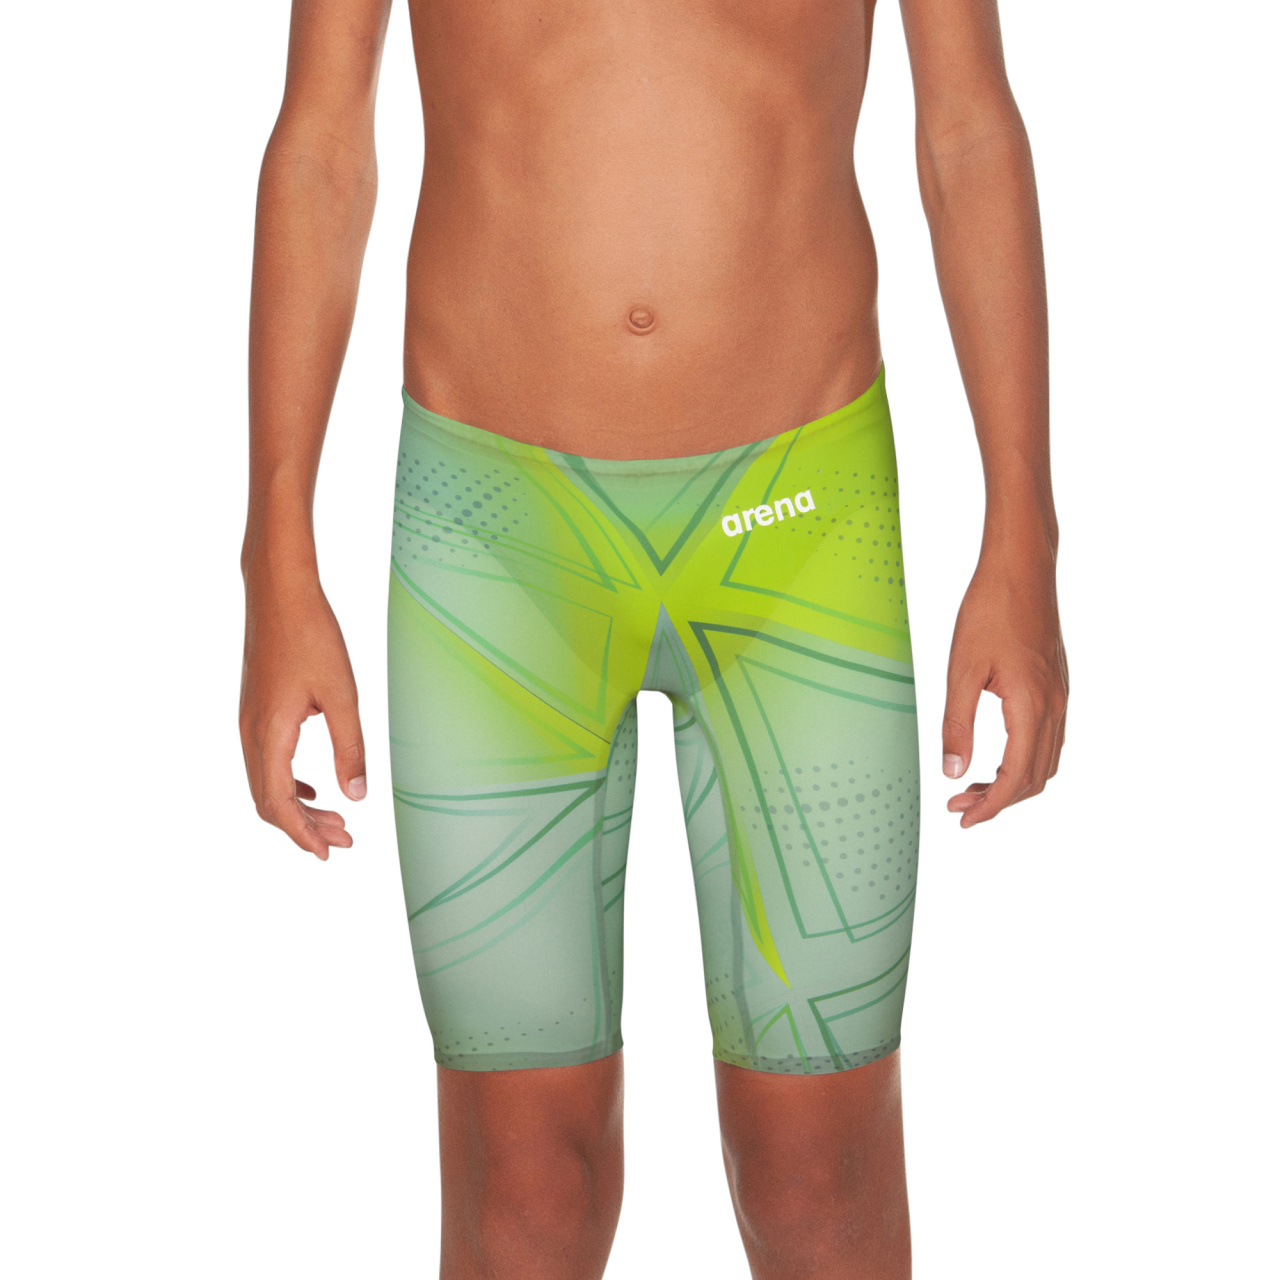 ARENA Powerskin R-EVO One Boy's Jammers Youth Racing Swimsuit 